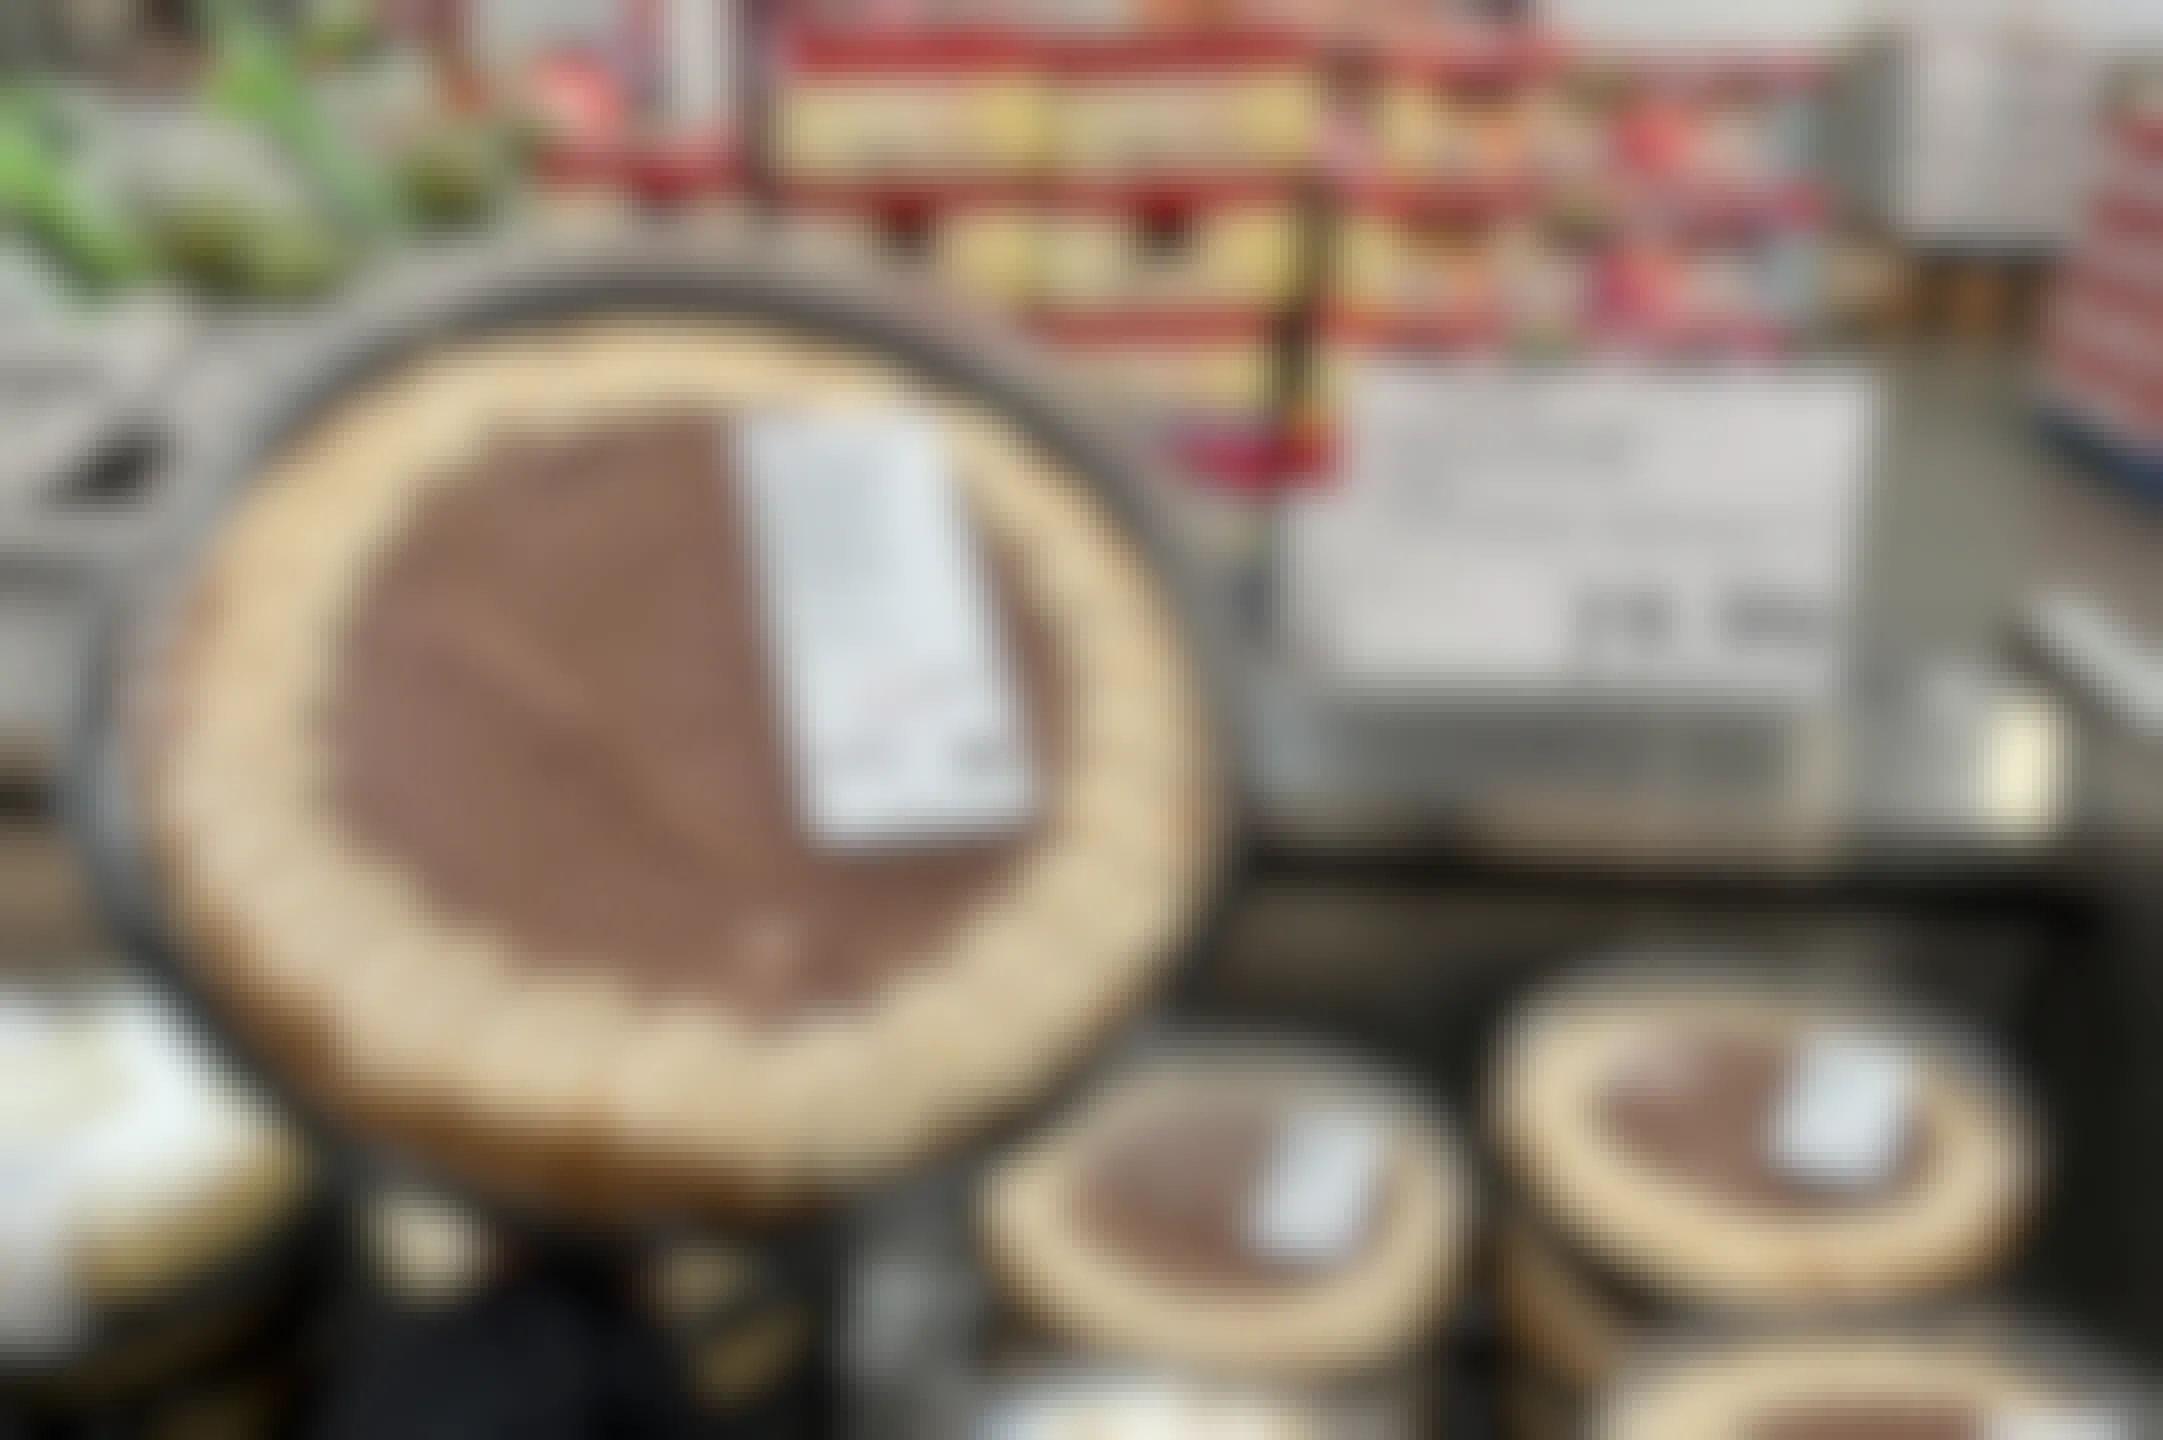 Peanut Butter pies at Costco